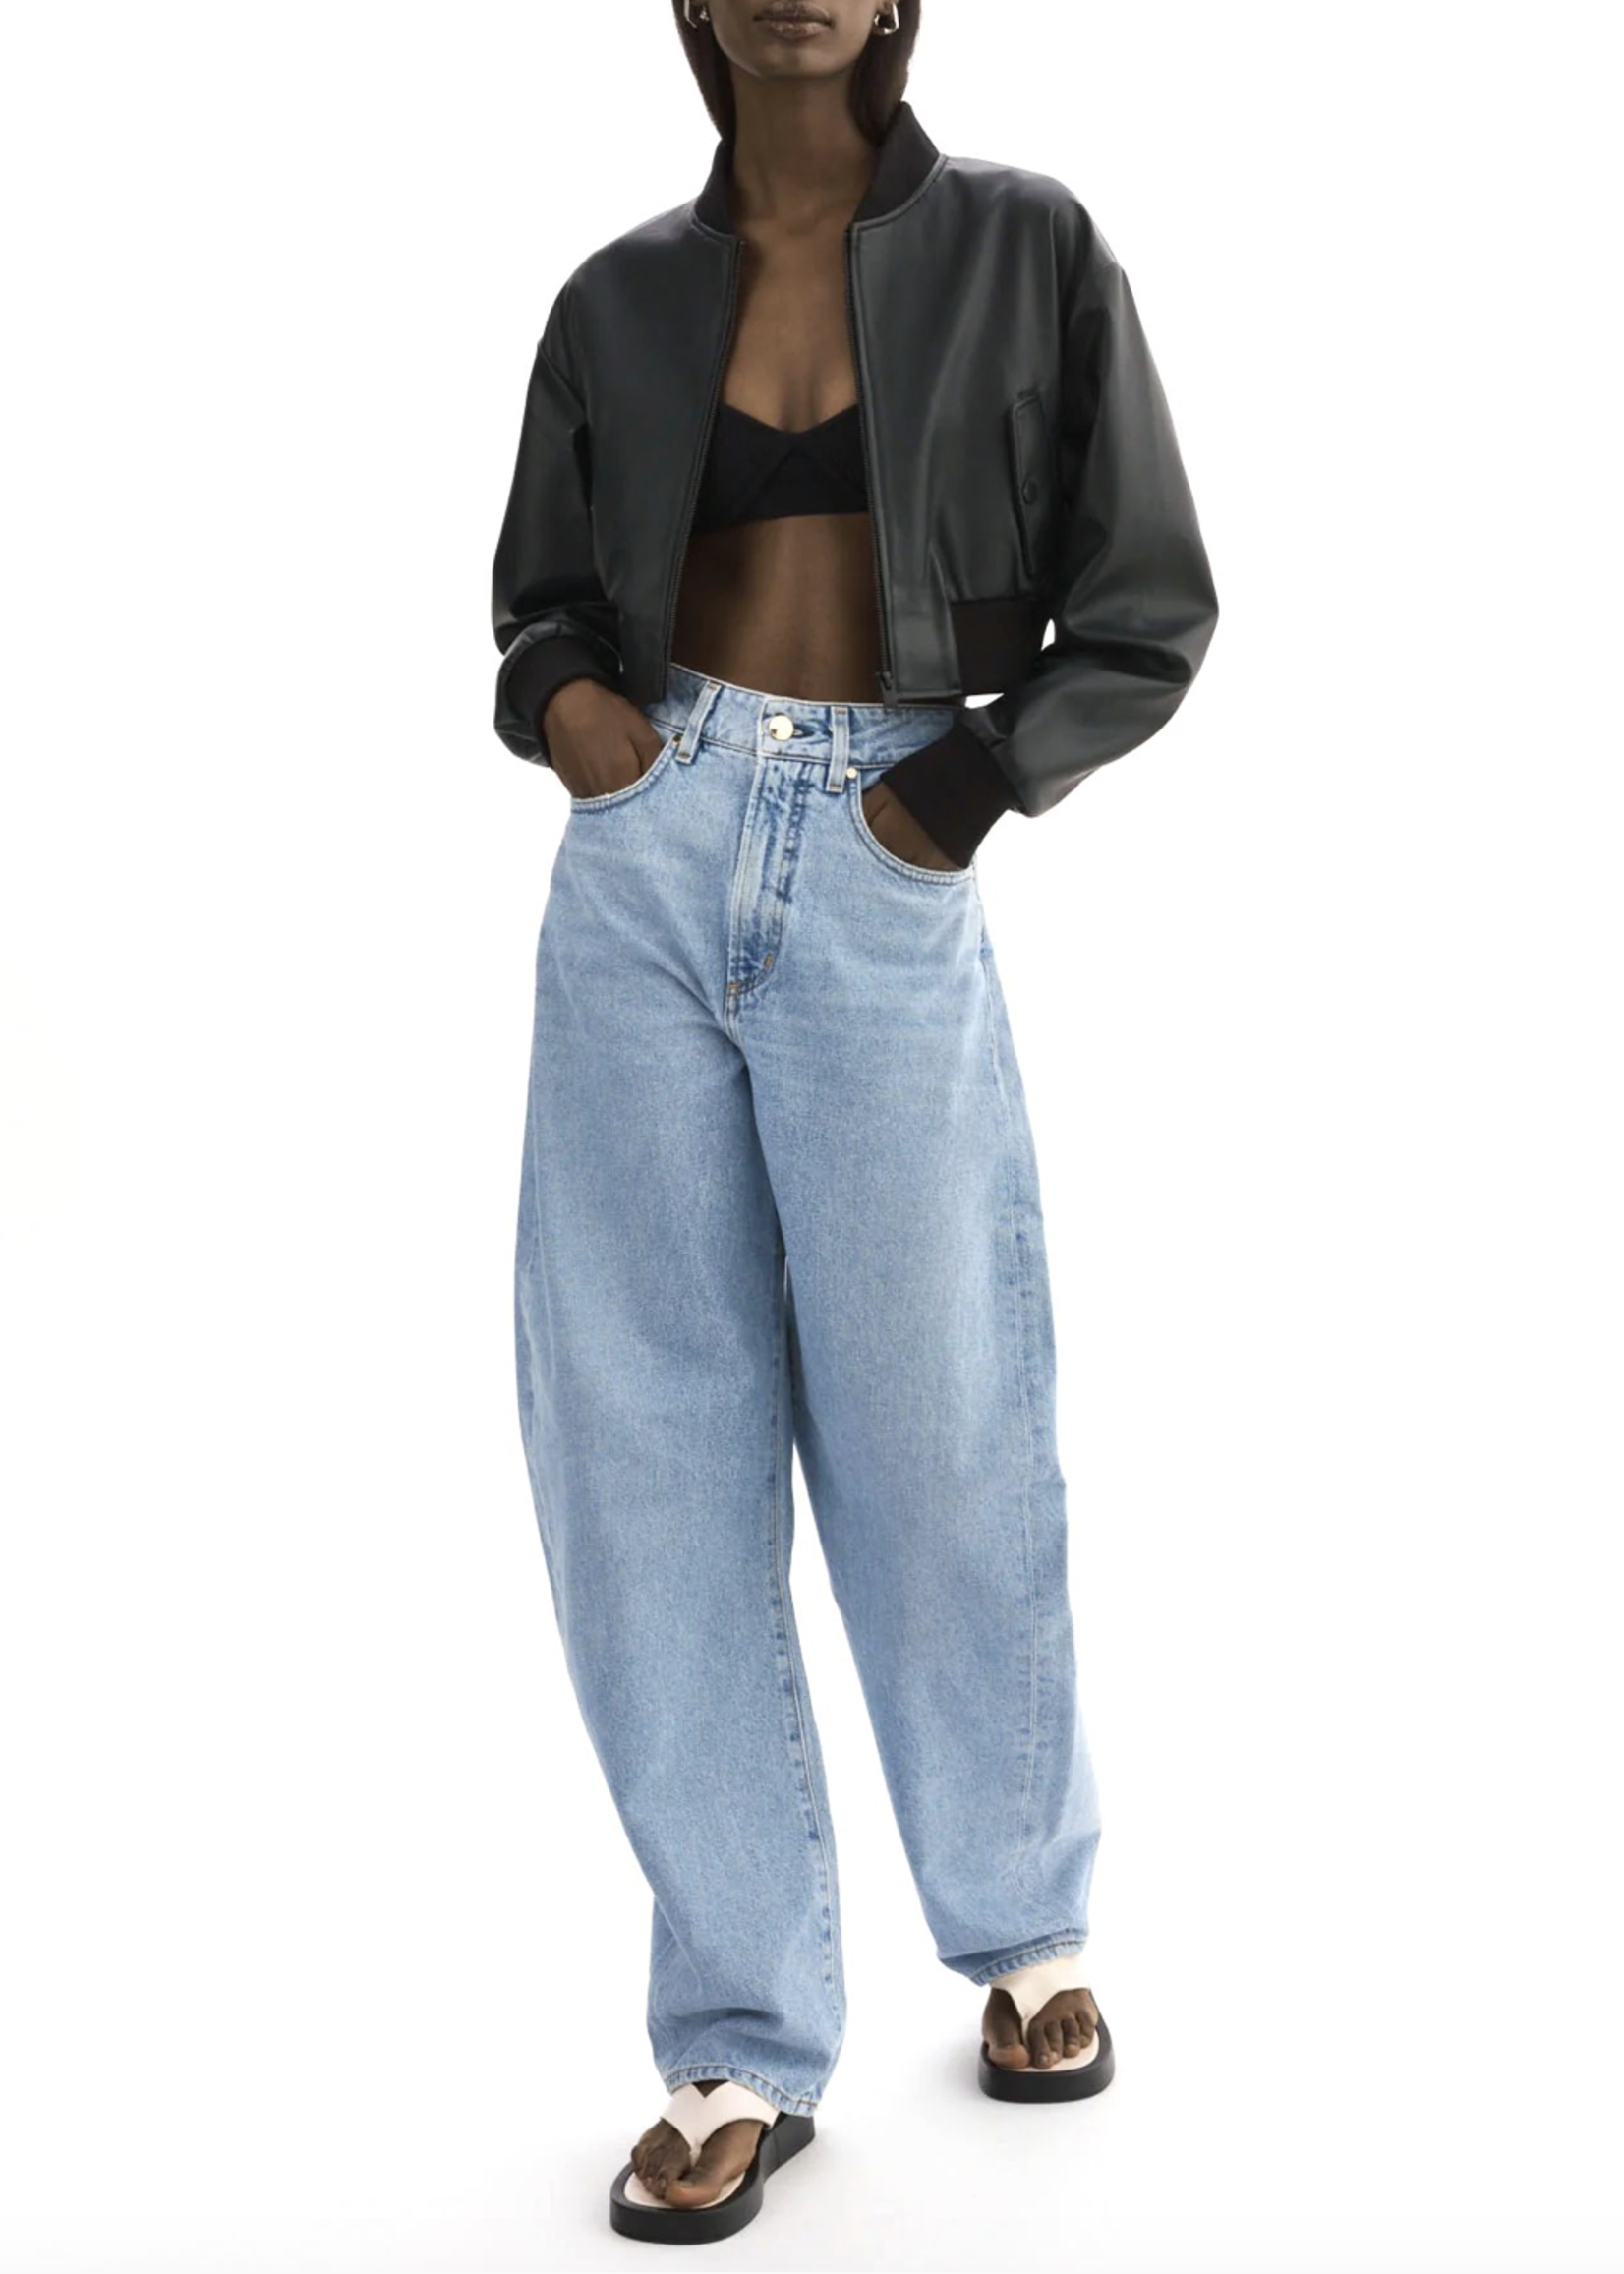 Lamarque Lamarque Evelin Faux Leather Cropped Bomber